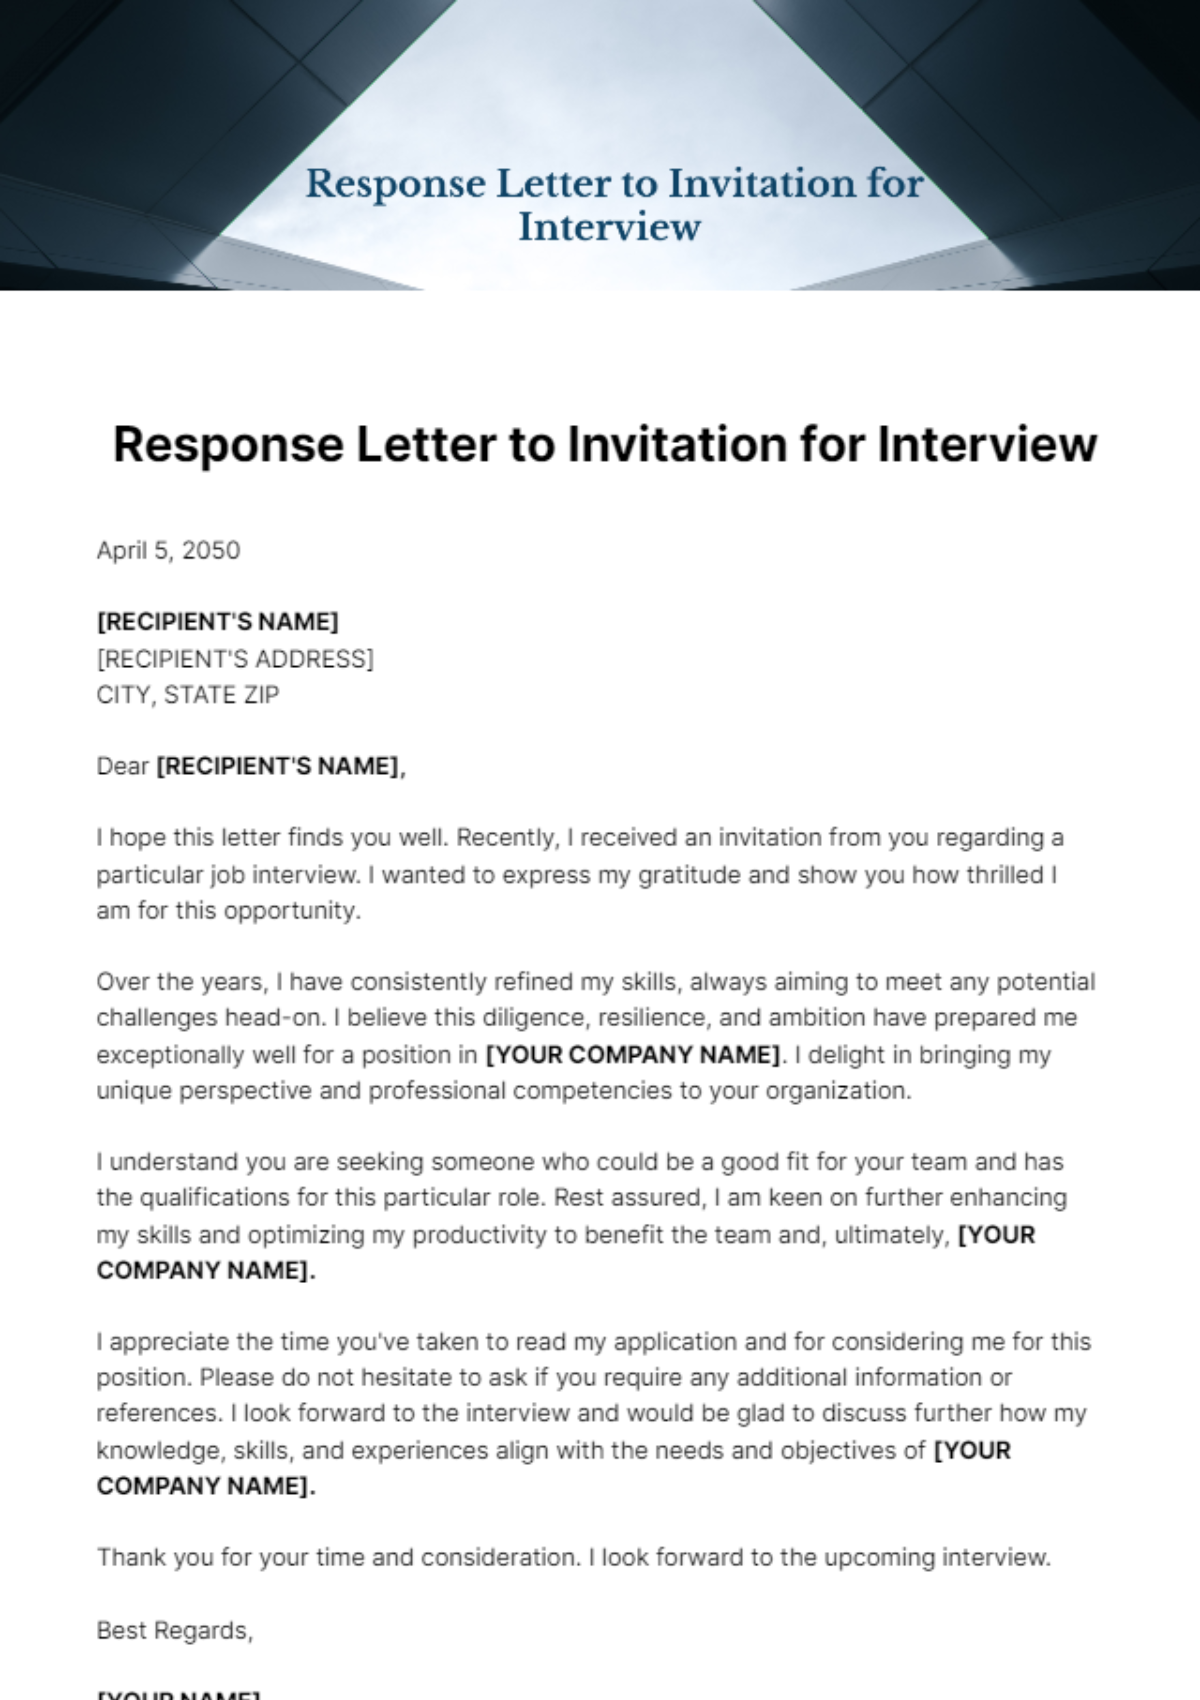 Response Letter to Invitation for Interview Template